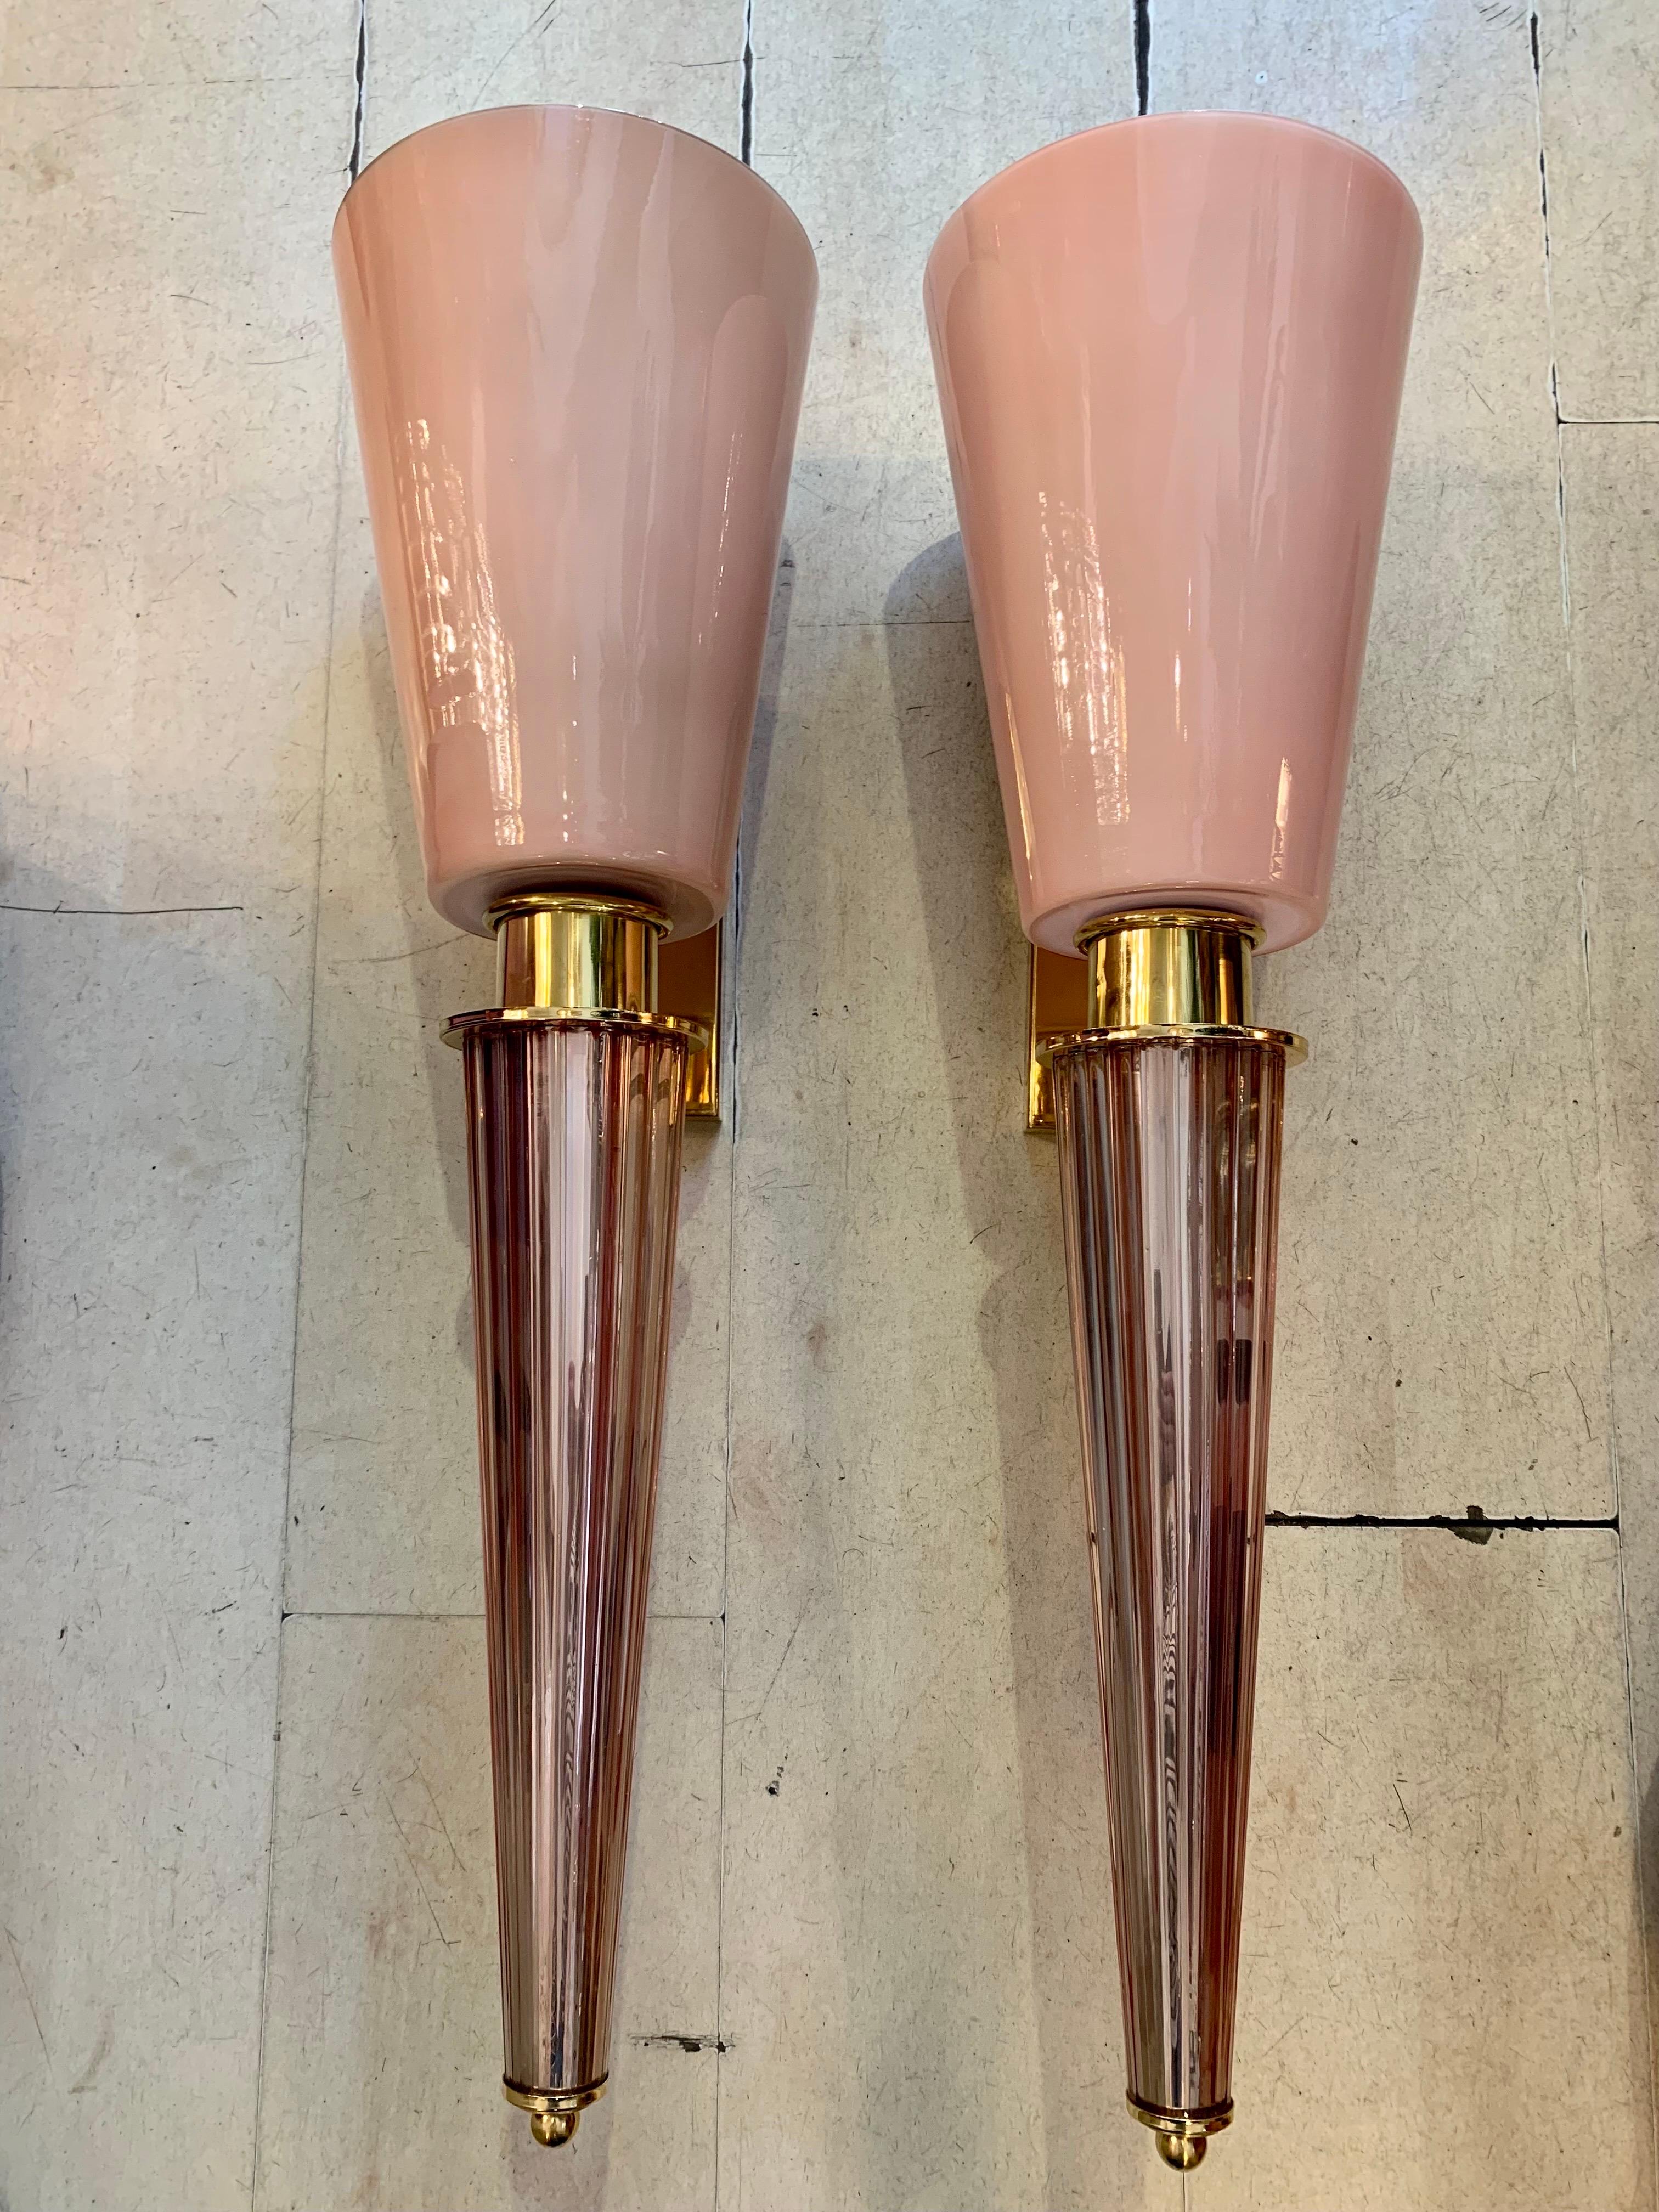 Pair of Art Deco pink conical Murano glass wall sconces, brass fittings. The cup is 